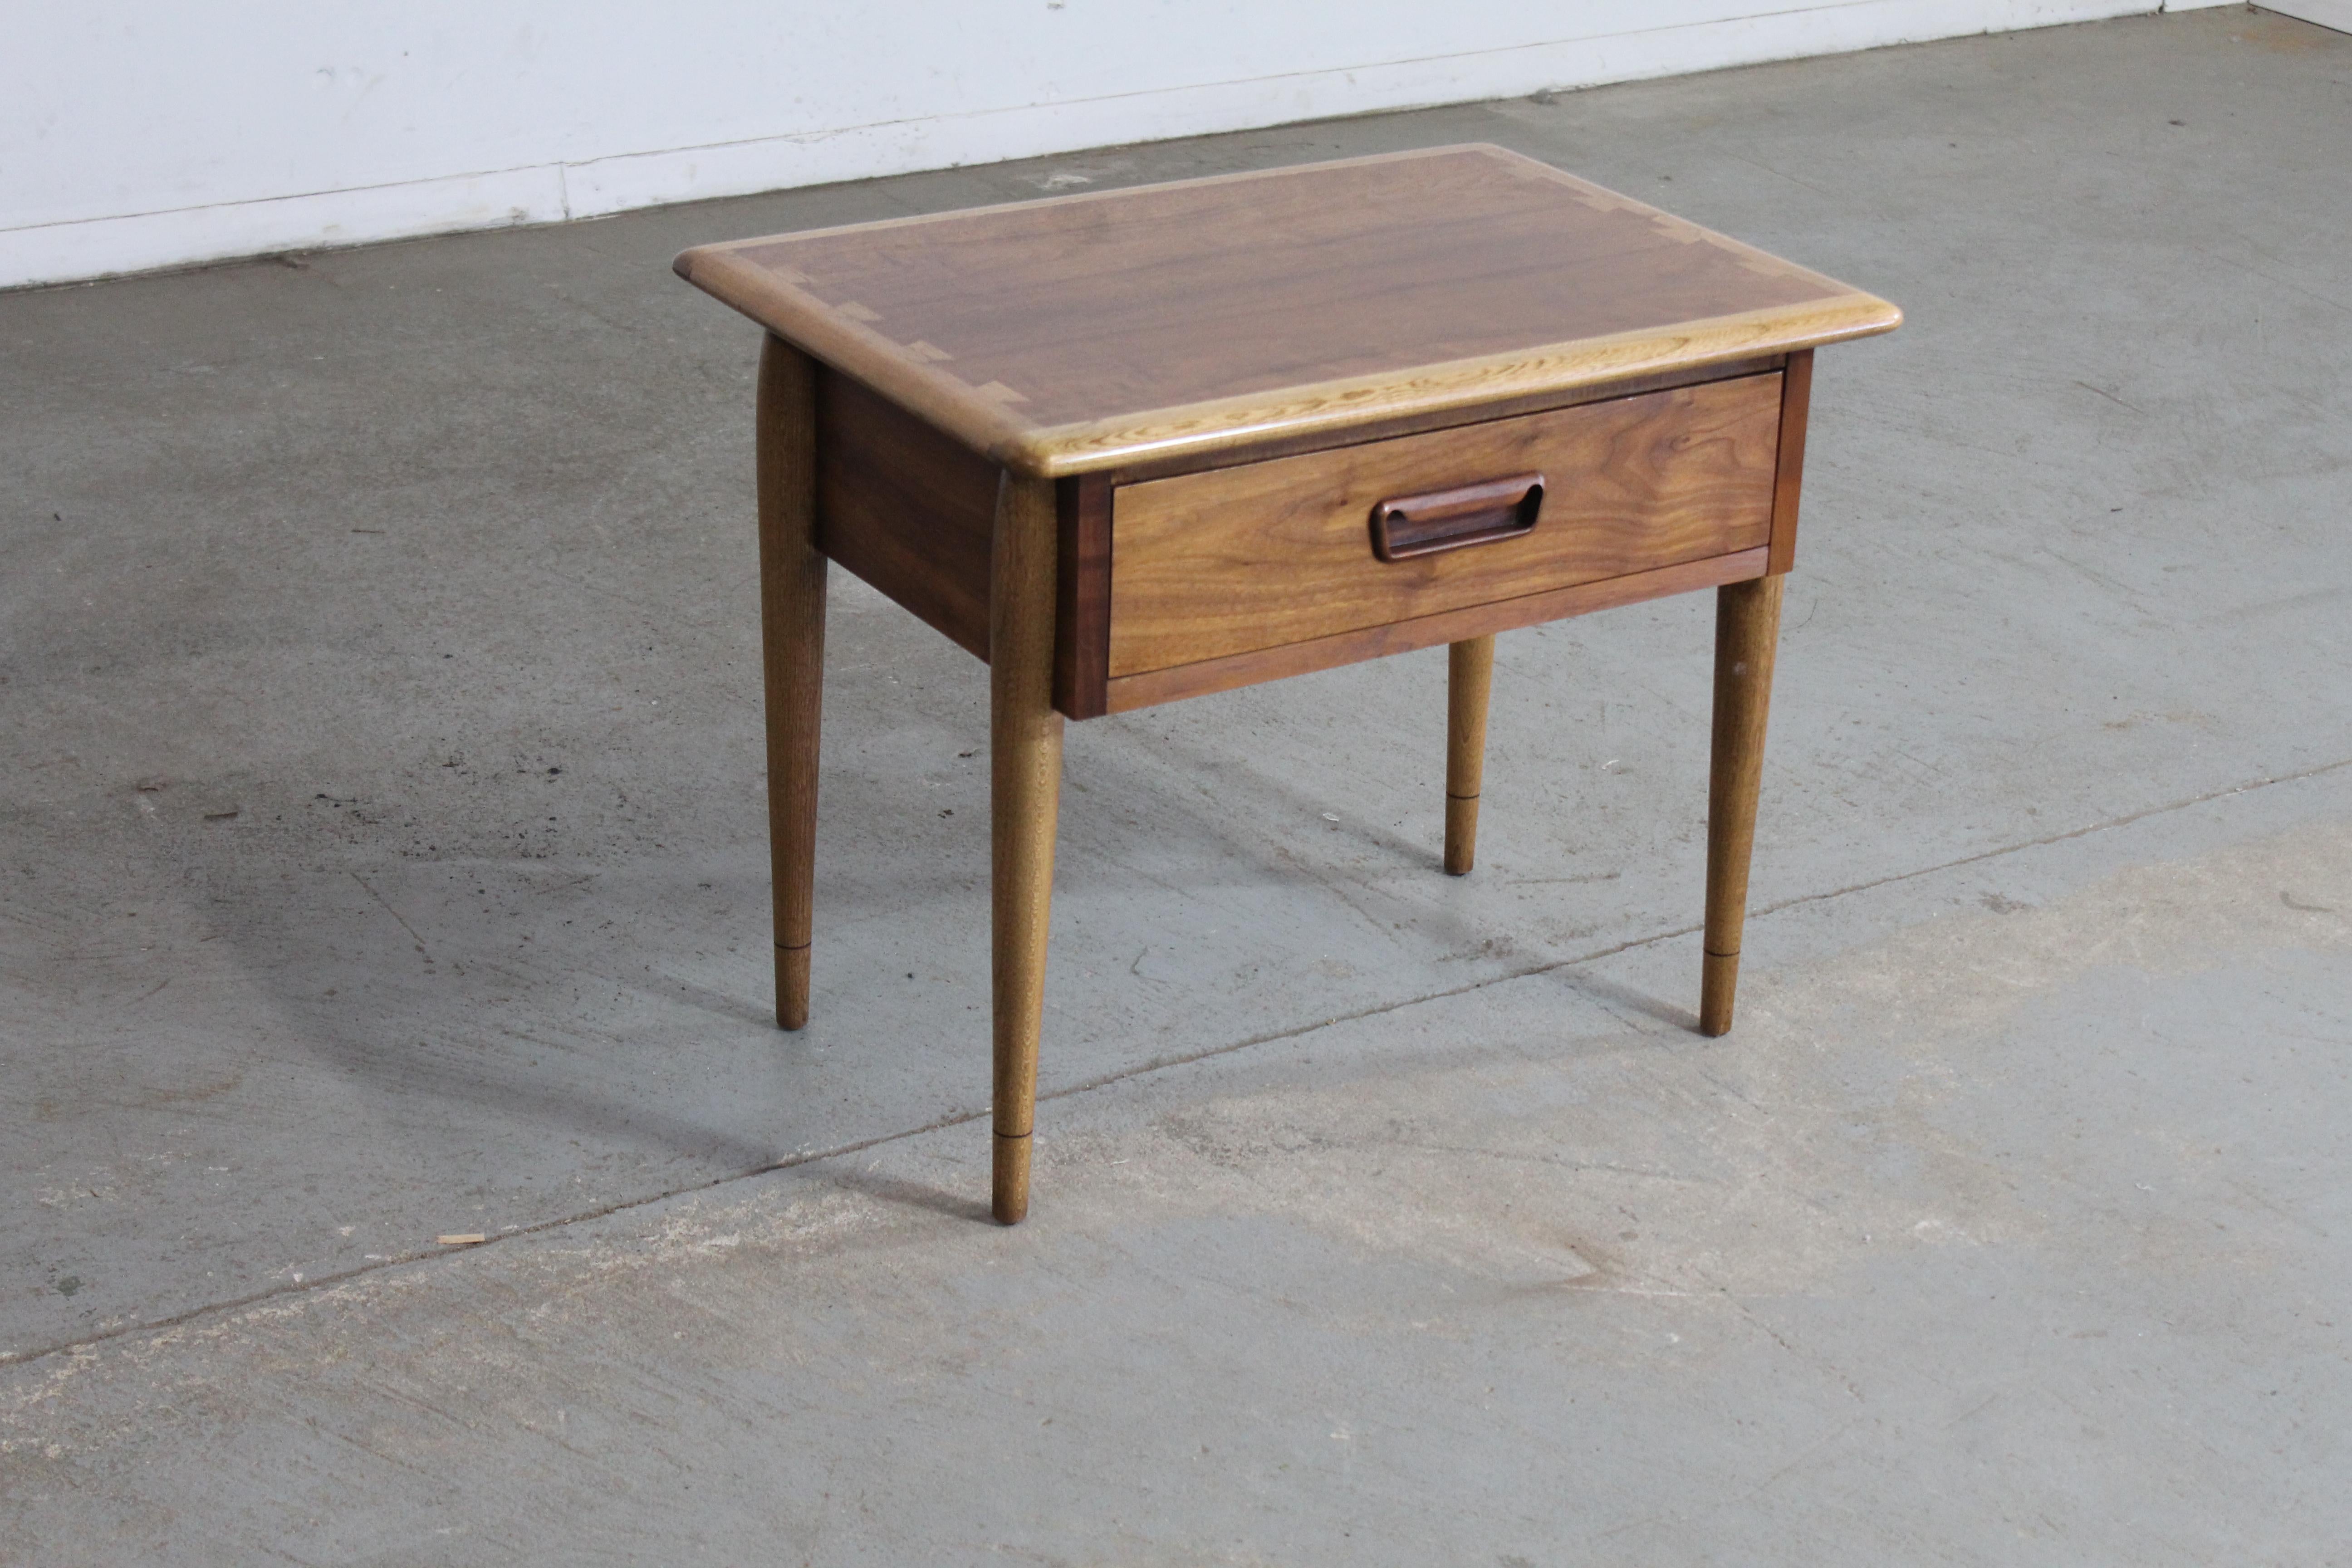 Mid-Century Modern Andre Bus Lane 'Acclaim' single drawer end table

Offered is a Mid-Century Modern end table from the Lane 'Acclaim' collection, designed by Andre Bus. They have the signature dovetailed design and tapered legs. This series